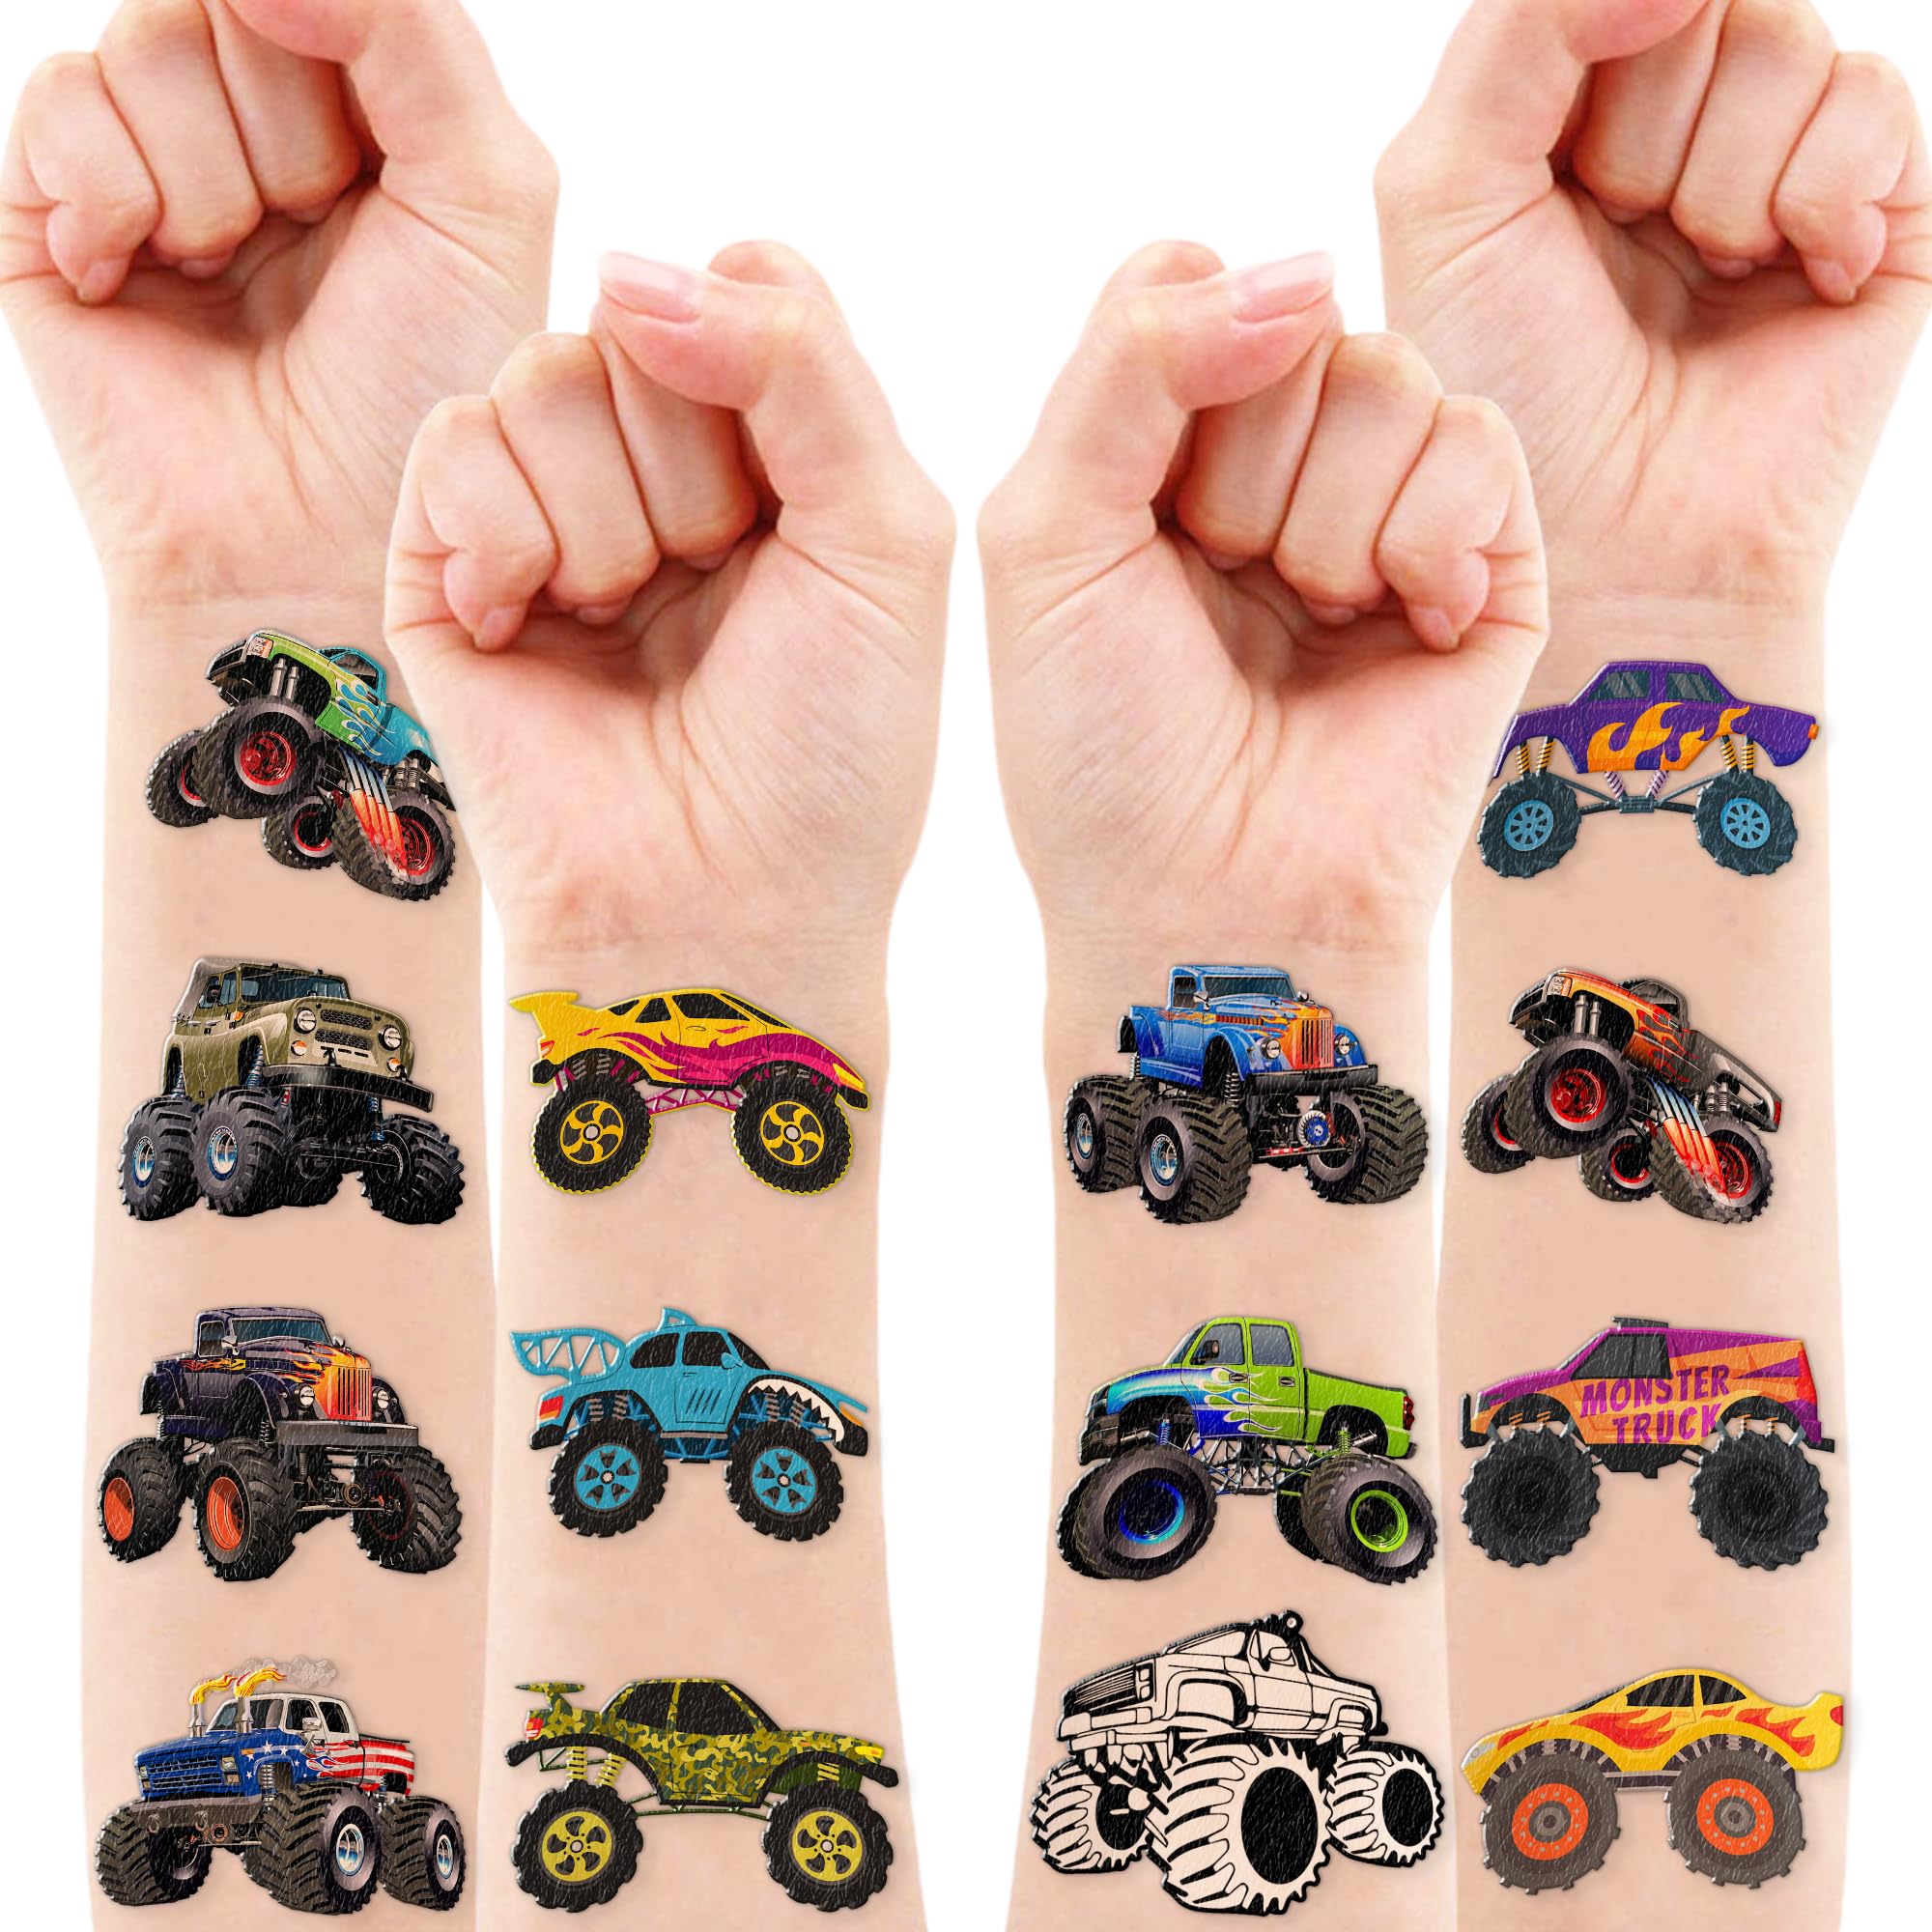 Monster Truck Temporary Tattoos for Kids | Birthday Party Supplies Favors Super Cute Fake 96PCS Tattoos Stickers Party Decorations Boys Girls School Rewards Gifts